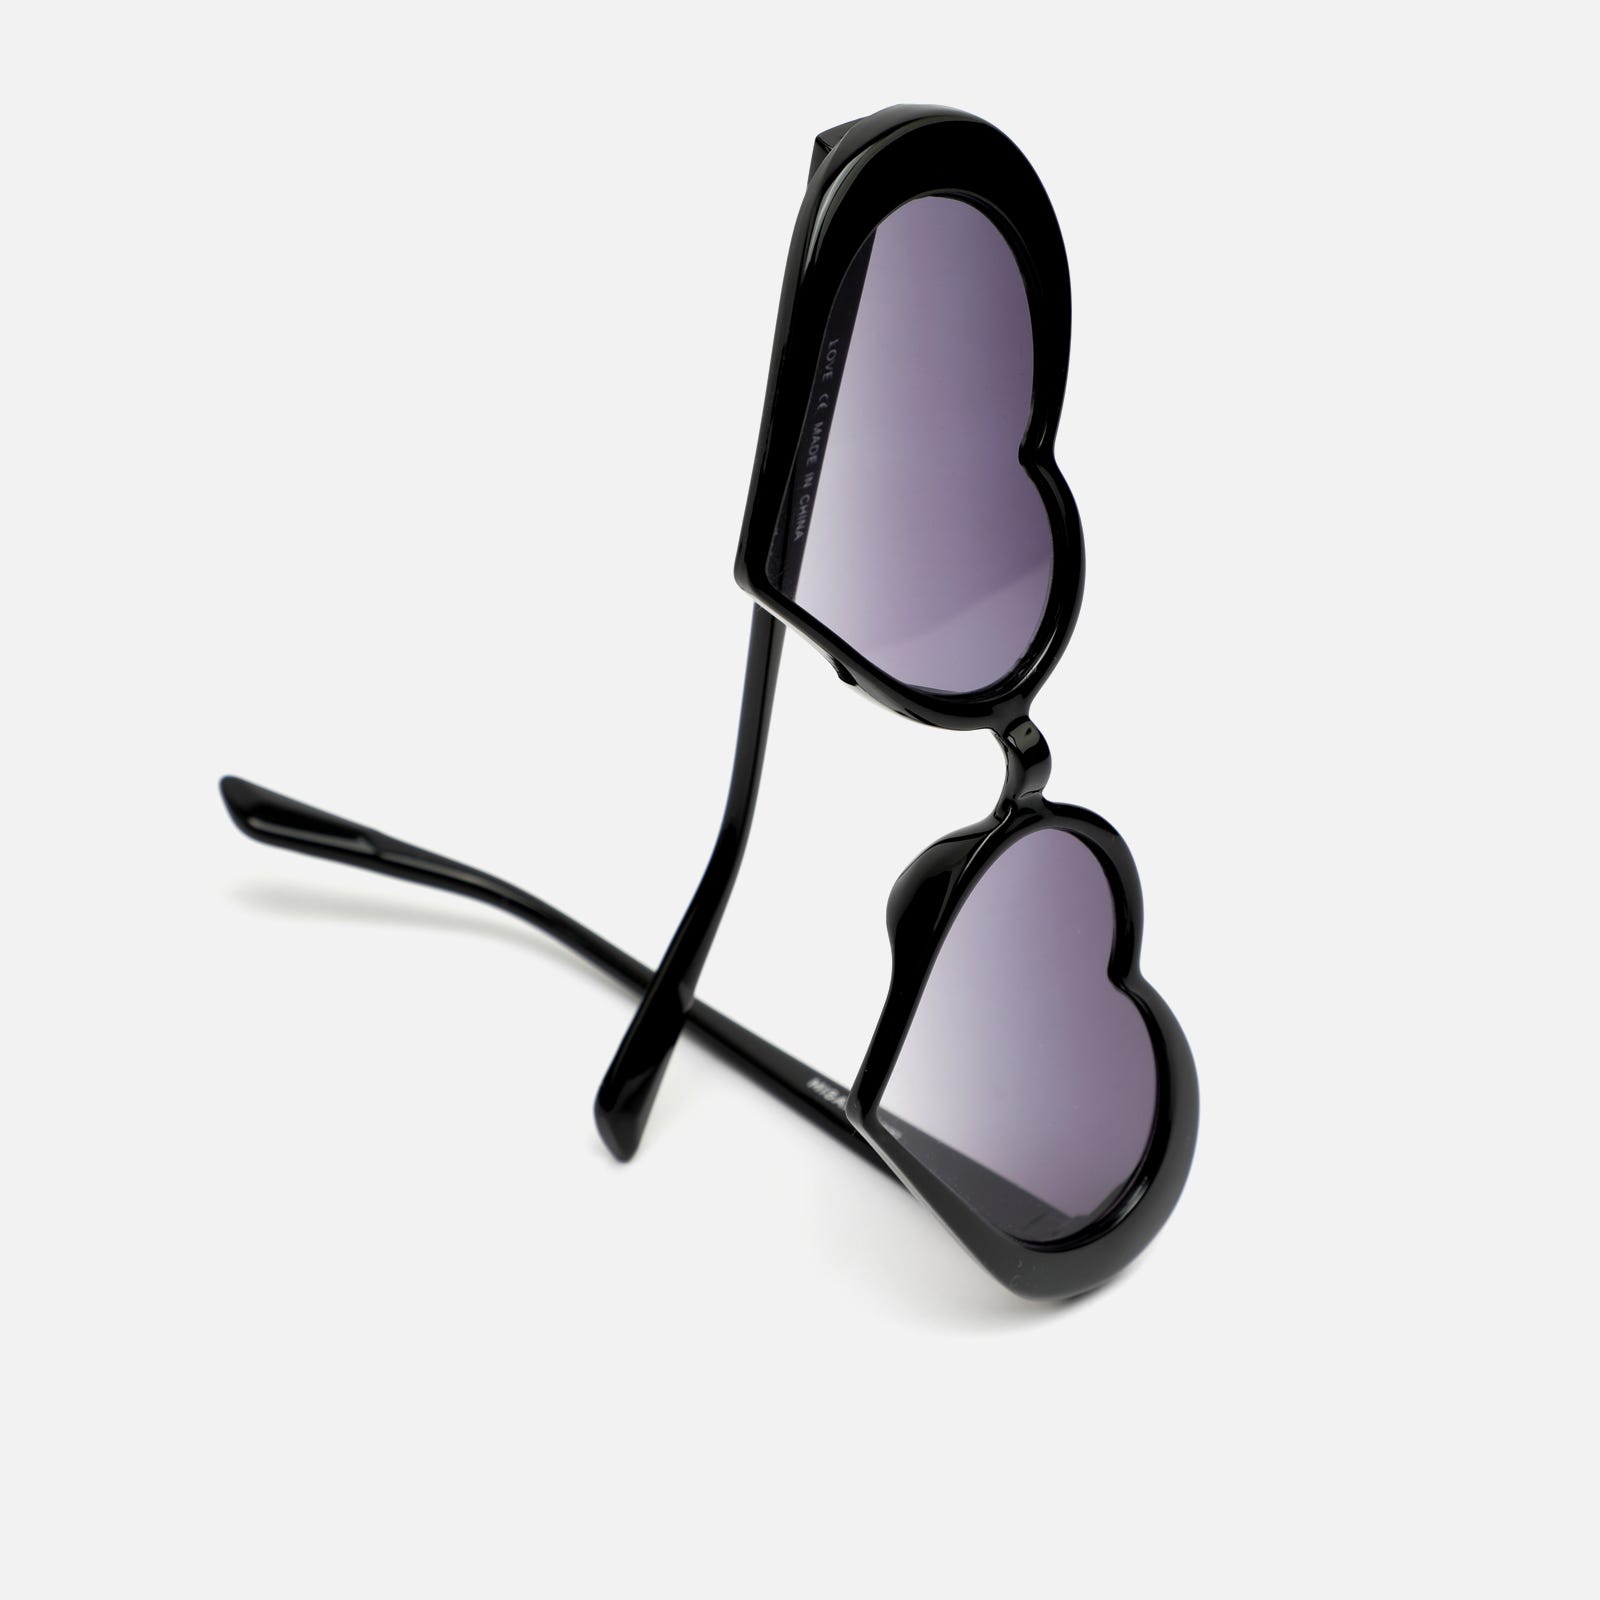 Love sunglasses with horn-rimmed frames